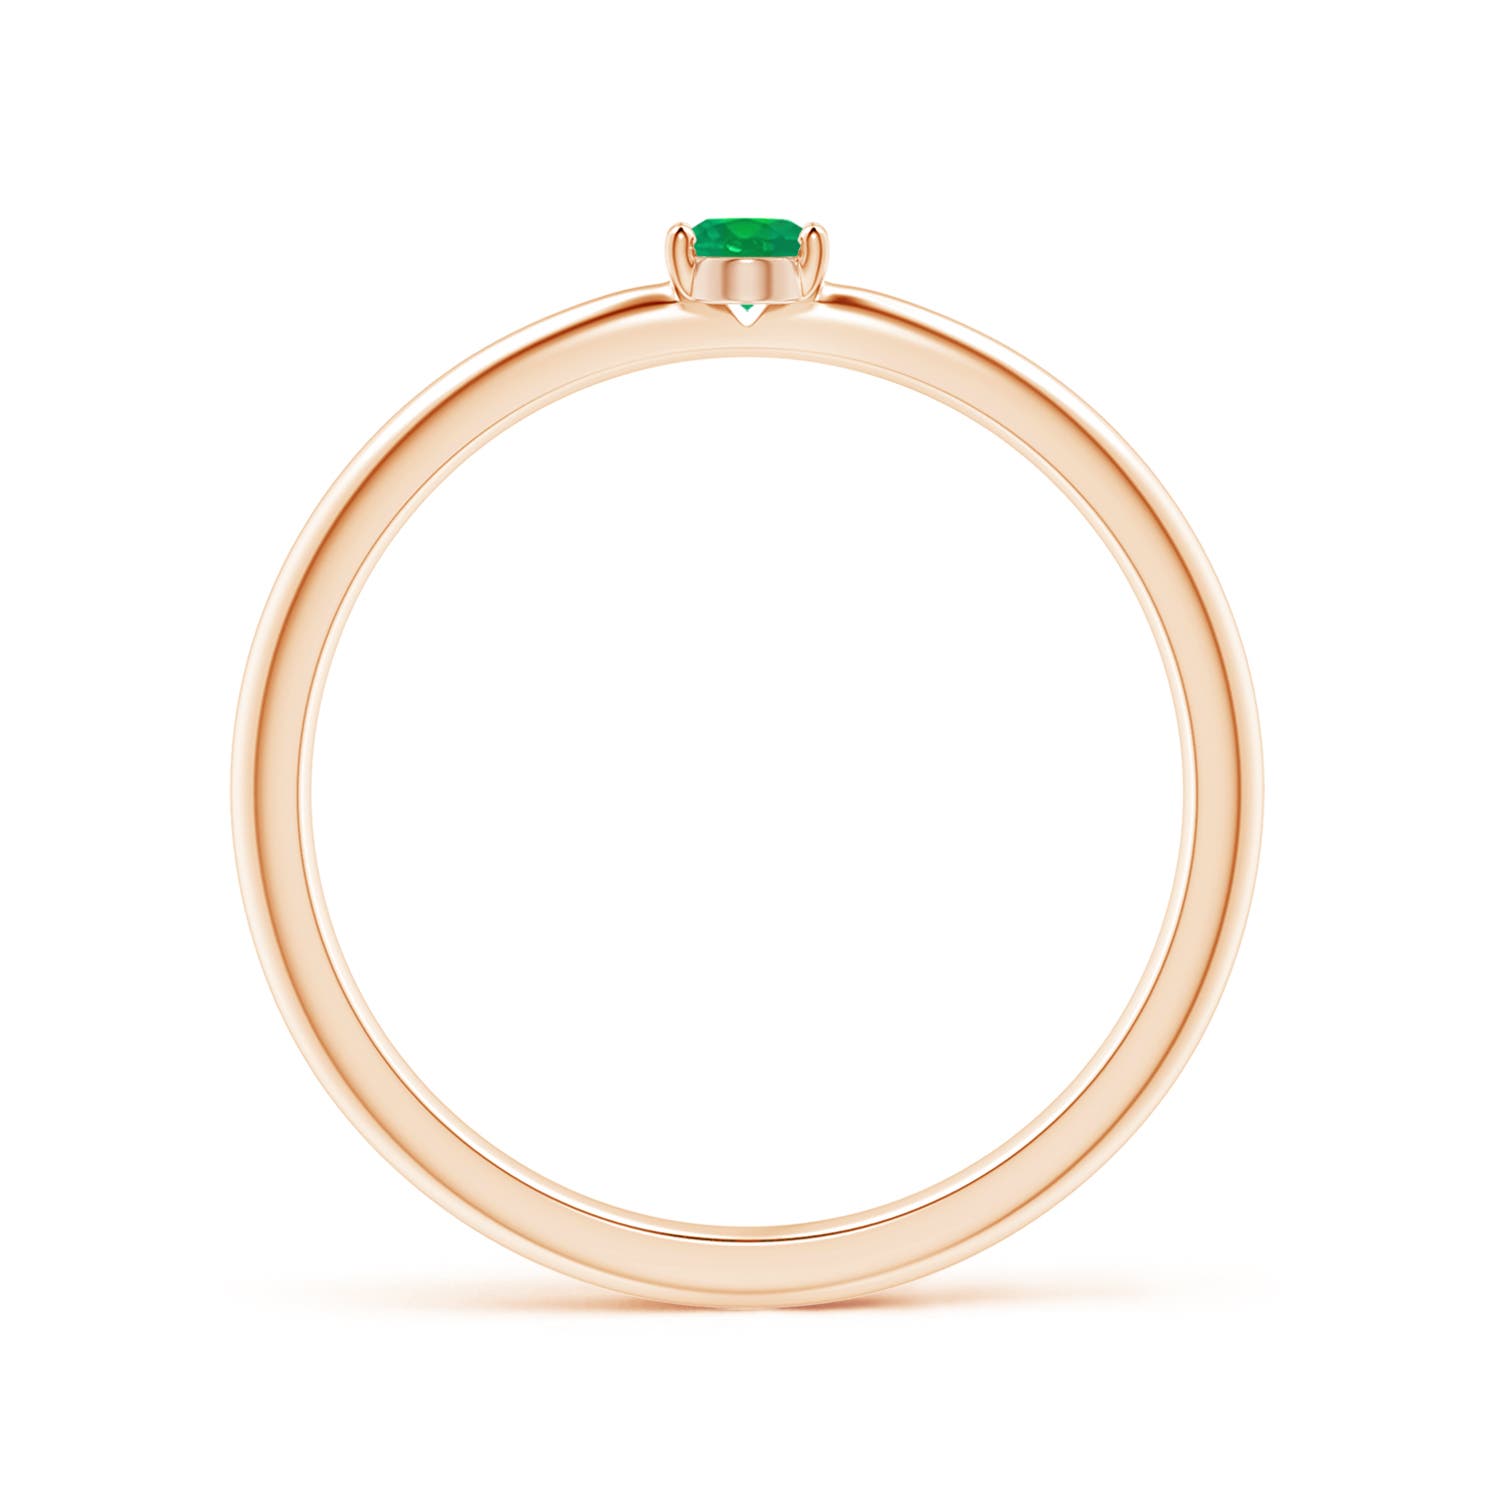 AA - Emerald / 0.12 CT / 14 KT Rose Gold